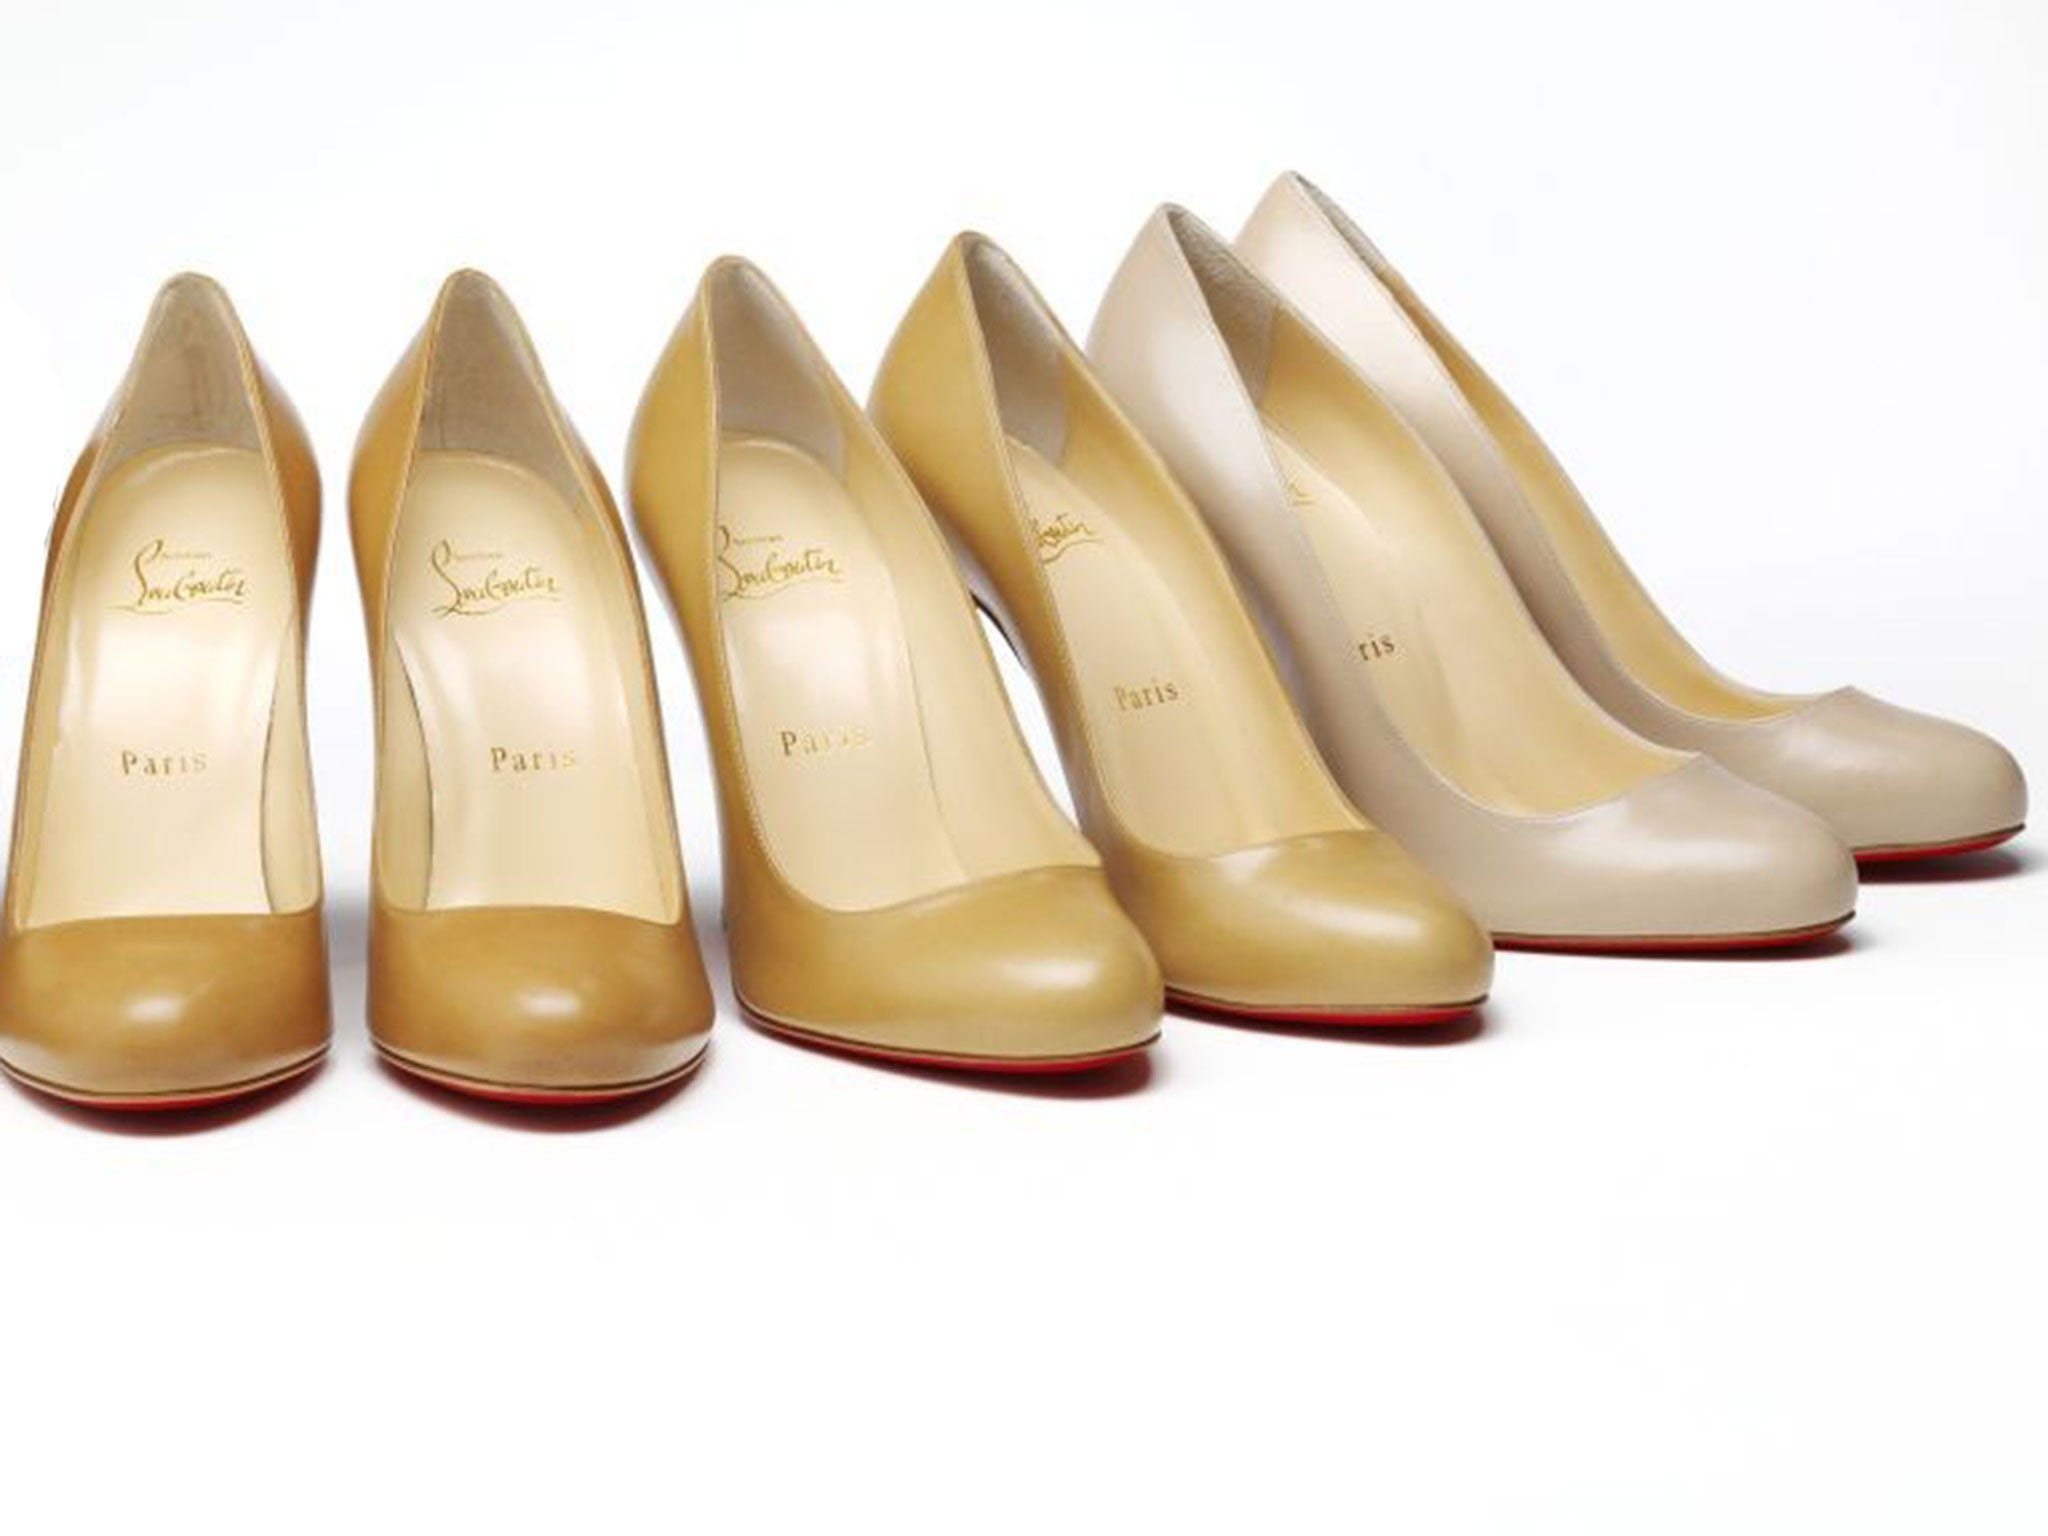 Louboutin Nudes collection
“Nude” is not a synonym for “fair”, “peachy” or “Caucasian” – though you’d be forgiven for thinking so, given fashion parlance. Step forward, Christian Louboutin: the footwear designer launched The Nudes Collection of stilettos